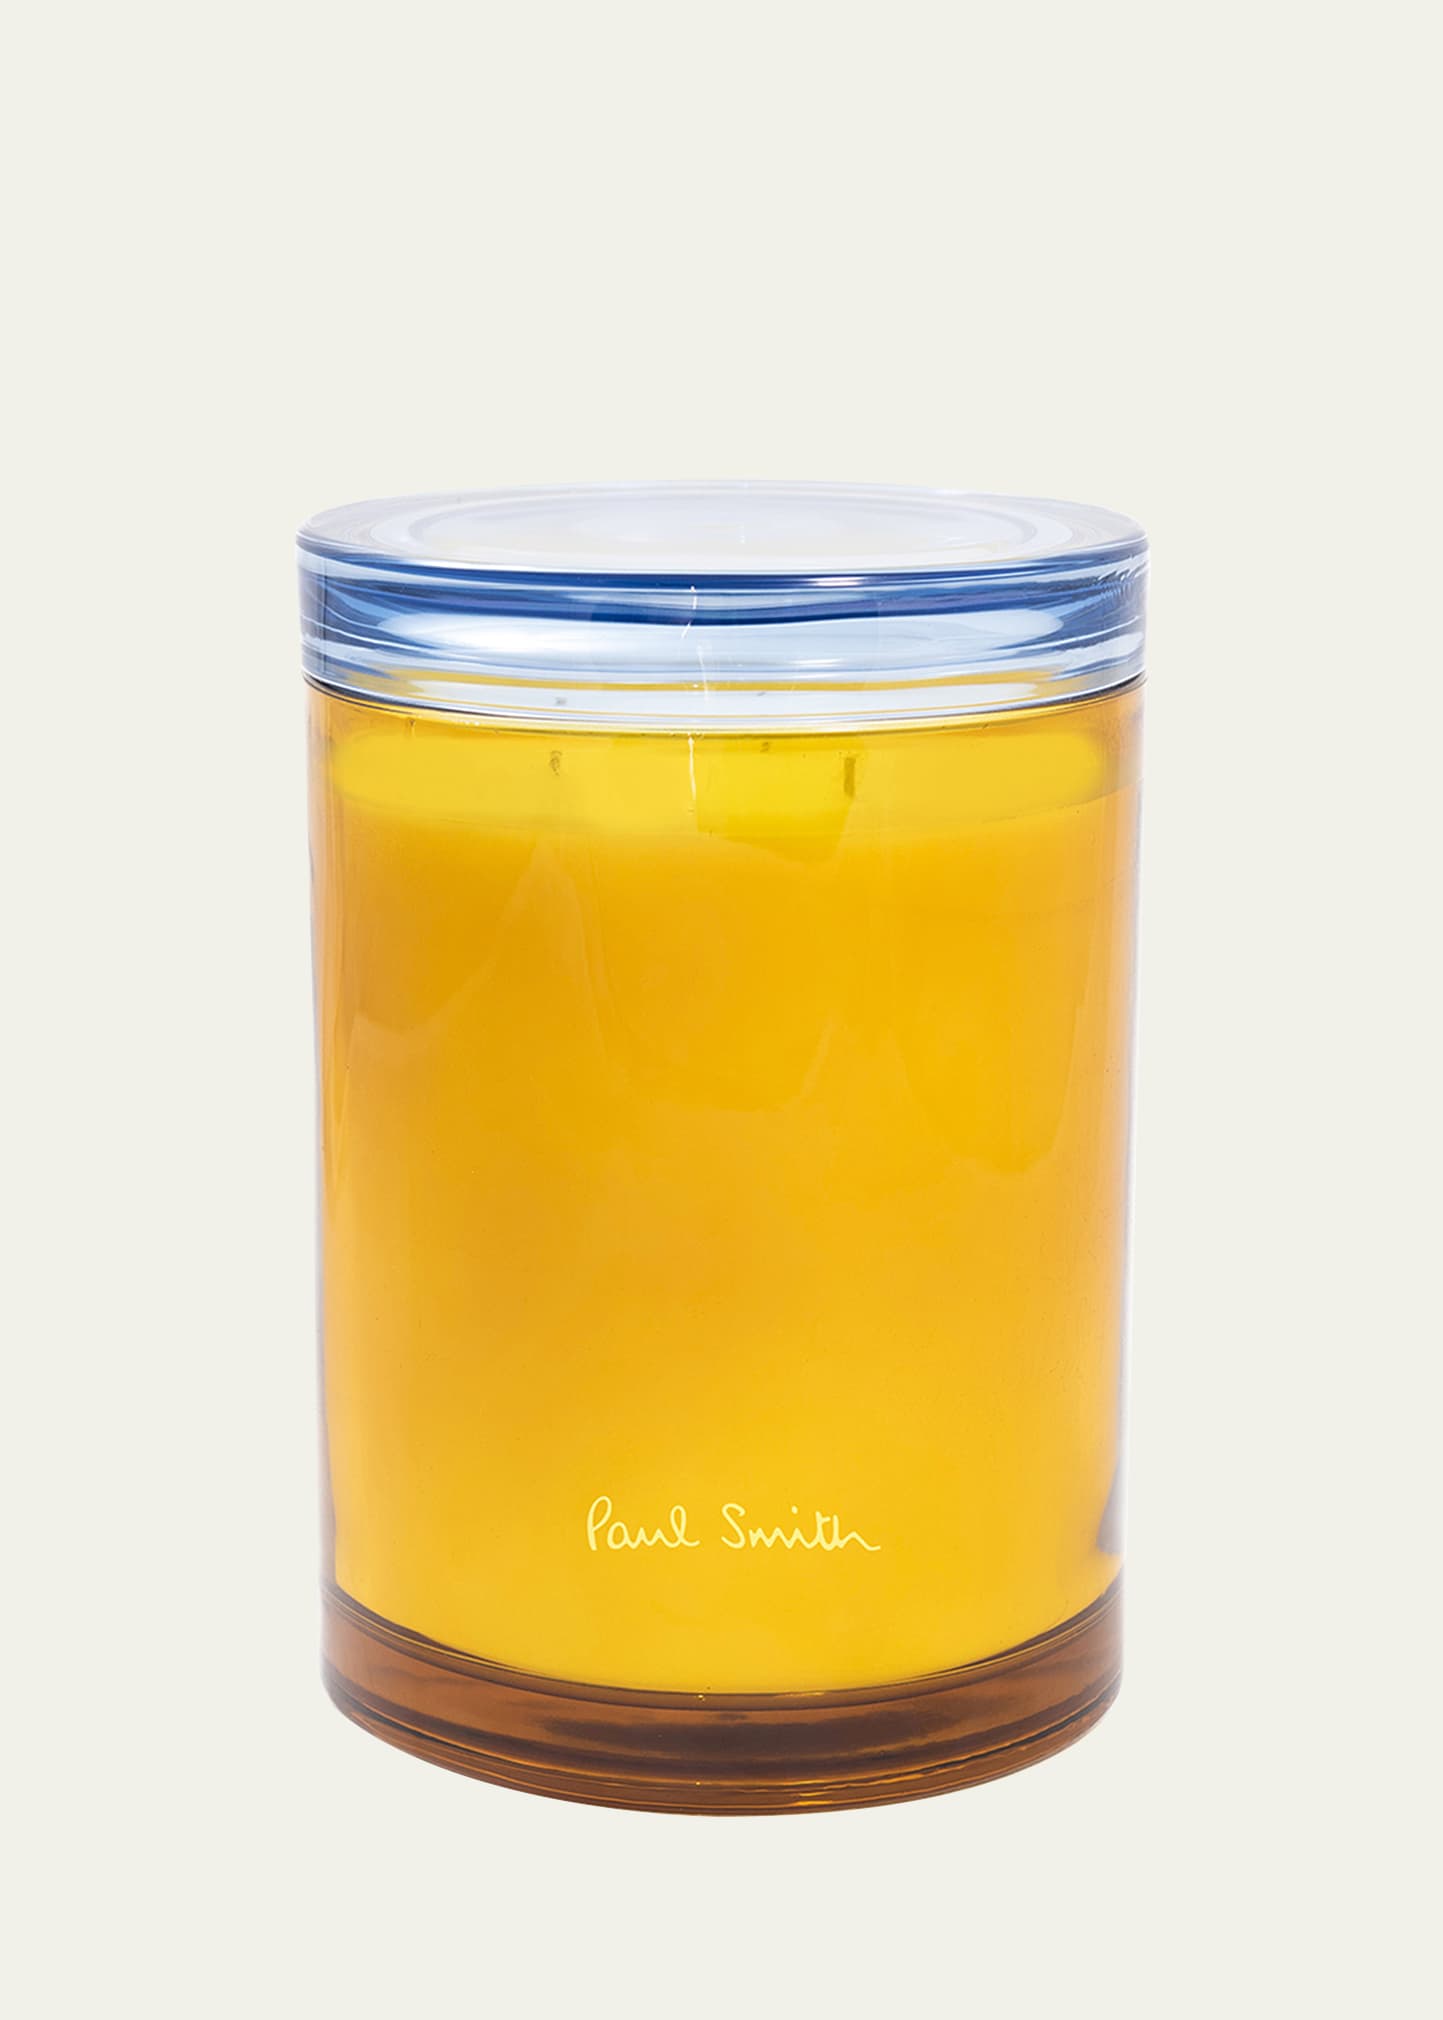 PAUL SMITH 35 OZ. DAY DREAMER CANDLE